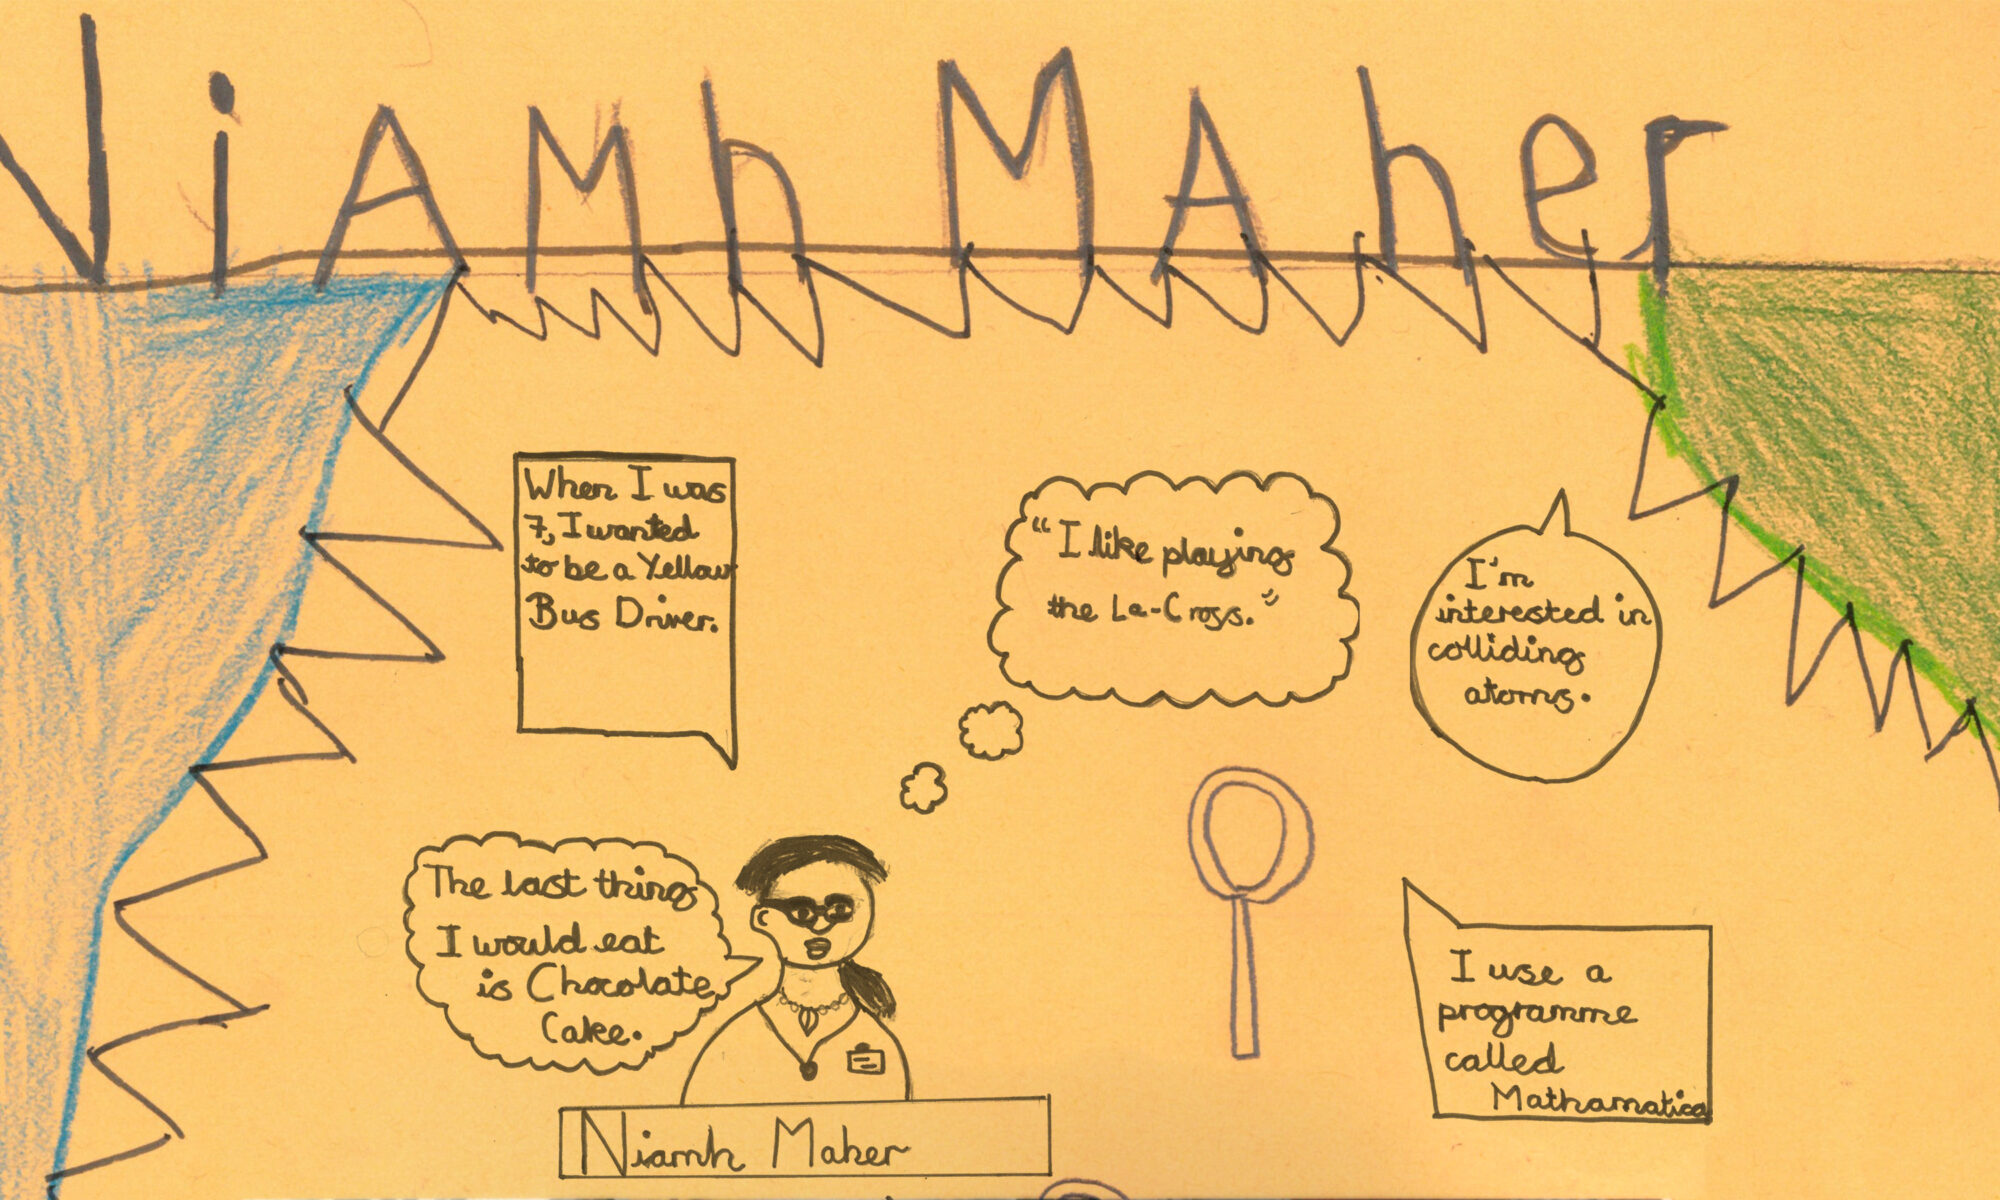 Drawing of Niamh Maher and the answers she gave in the interview